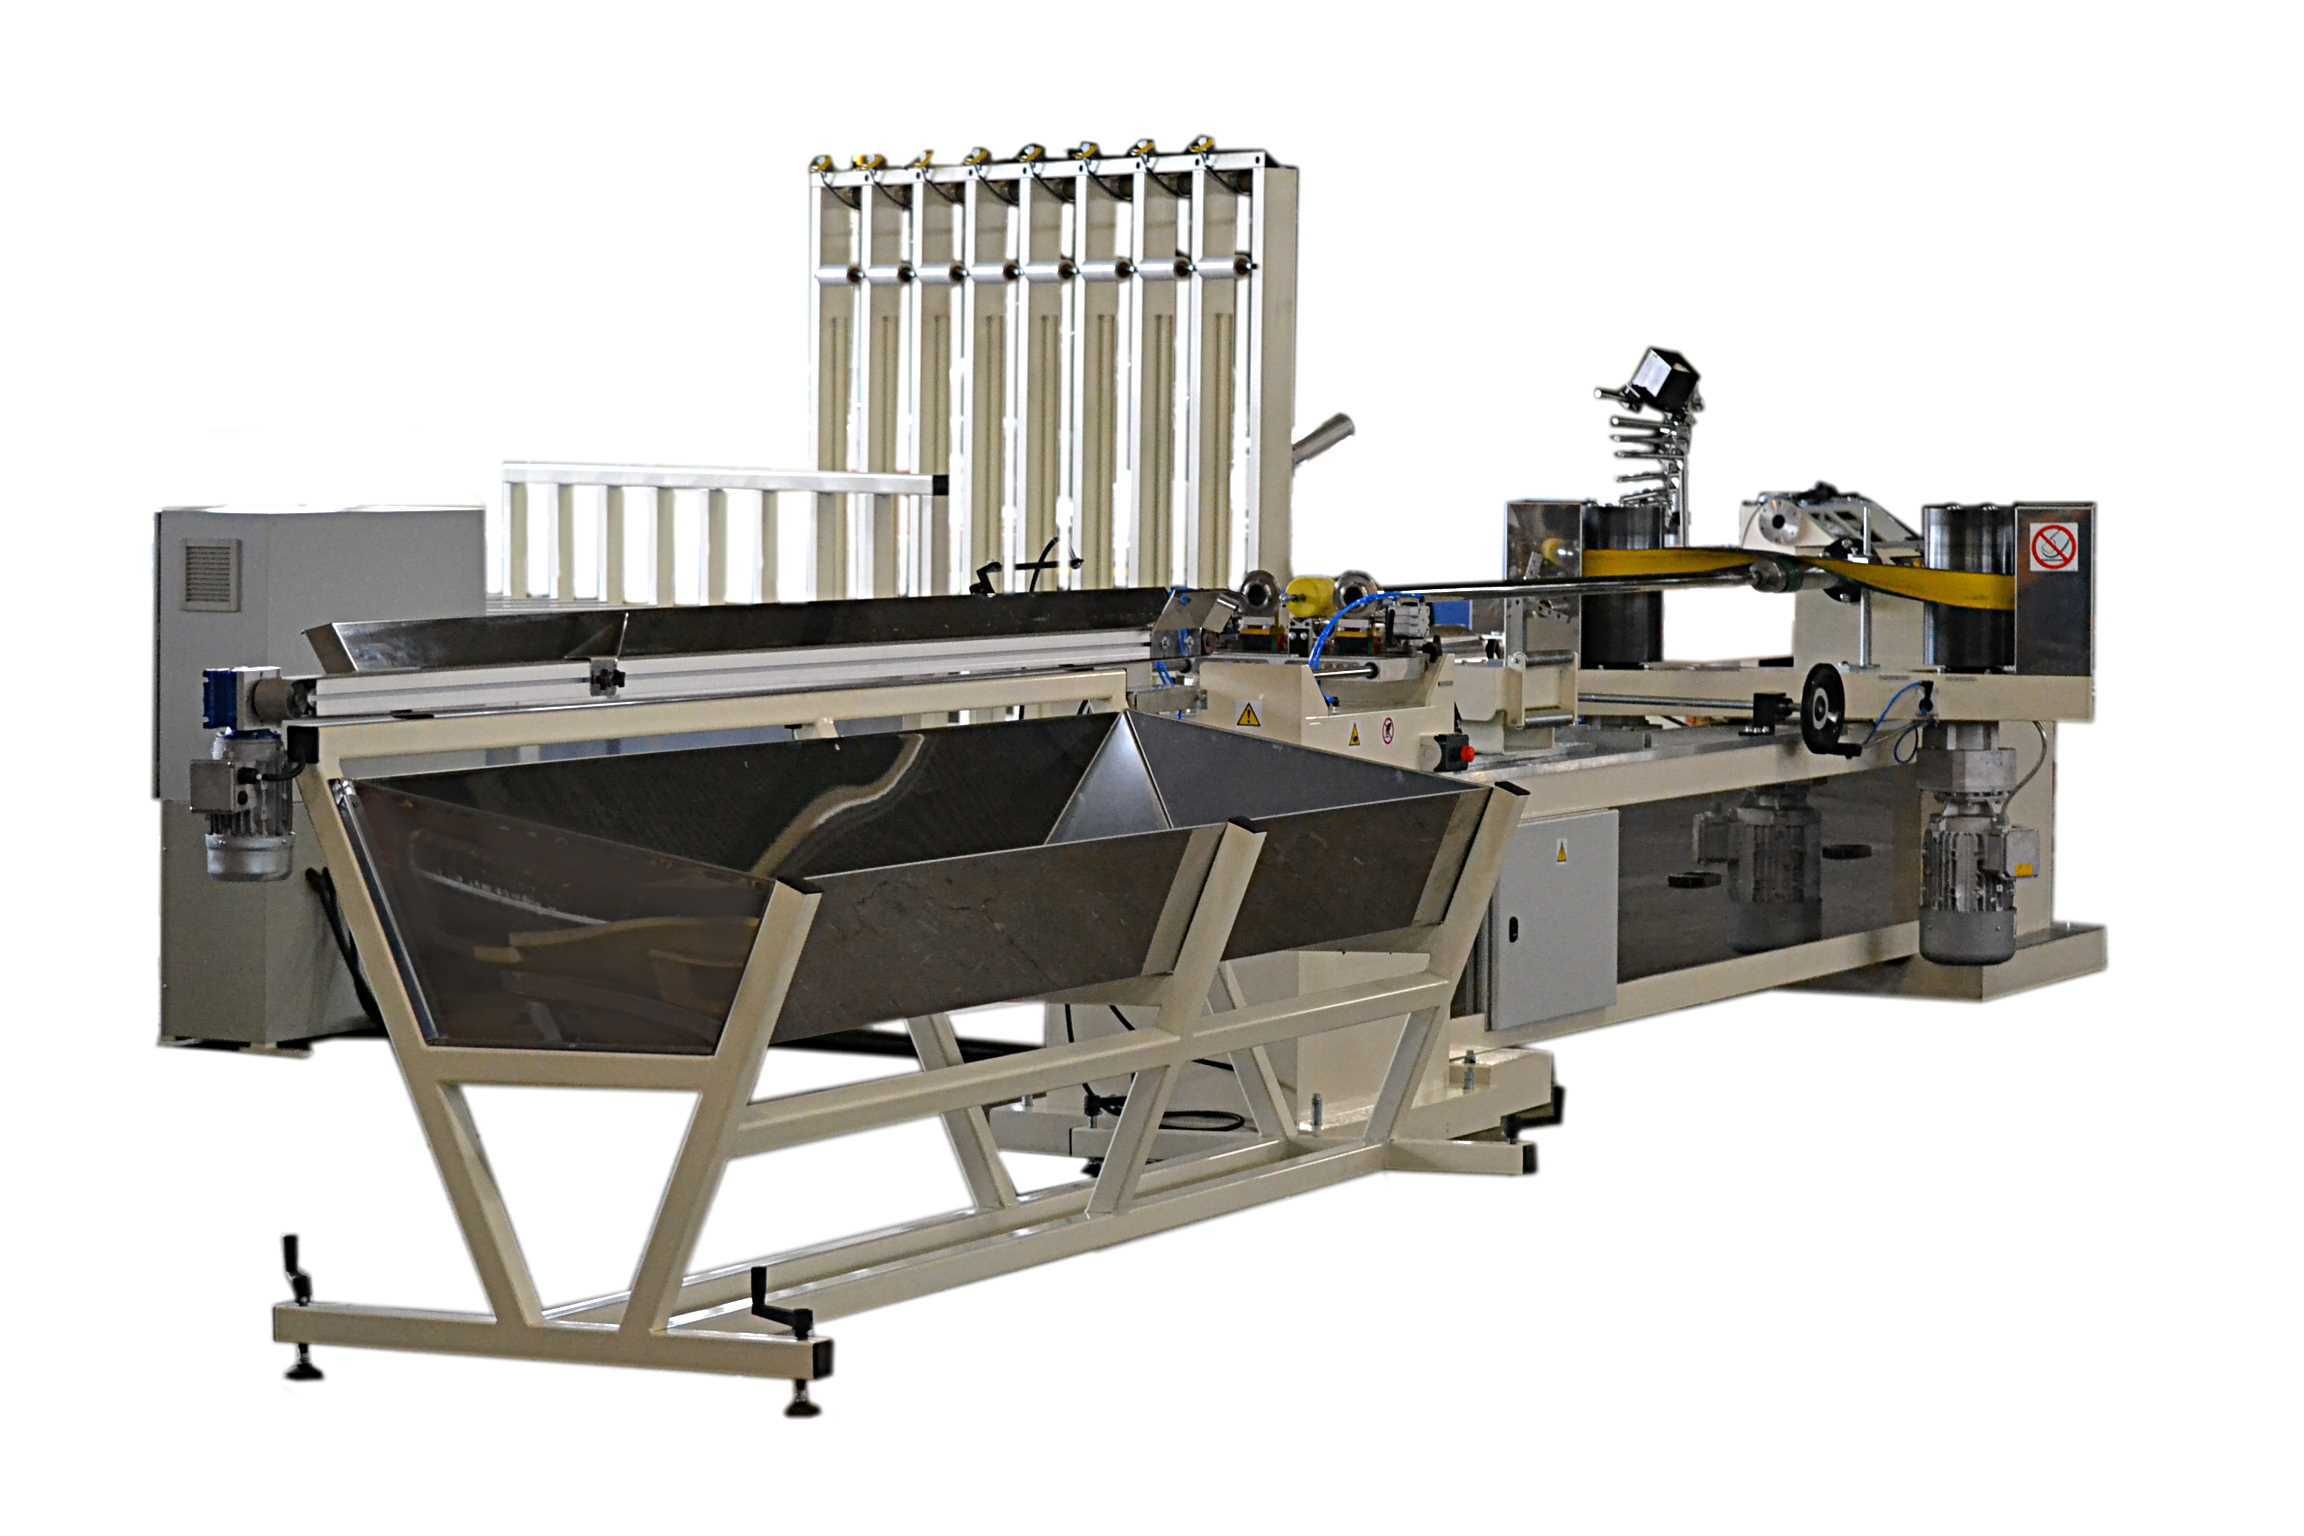 8 web paper core making machine with one cutter